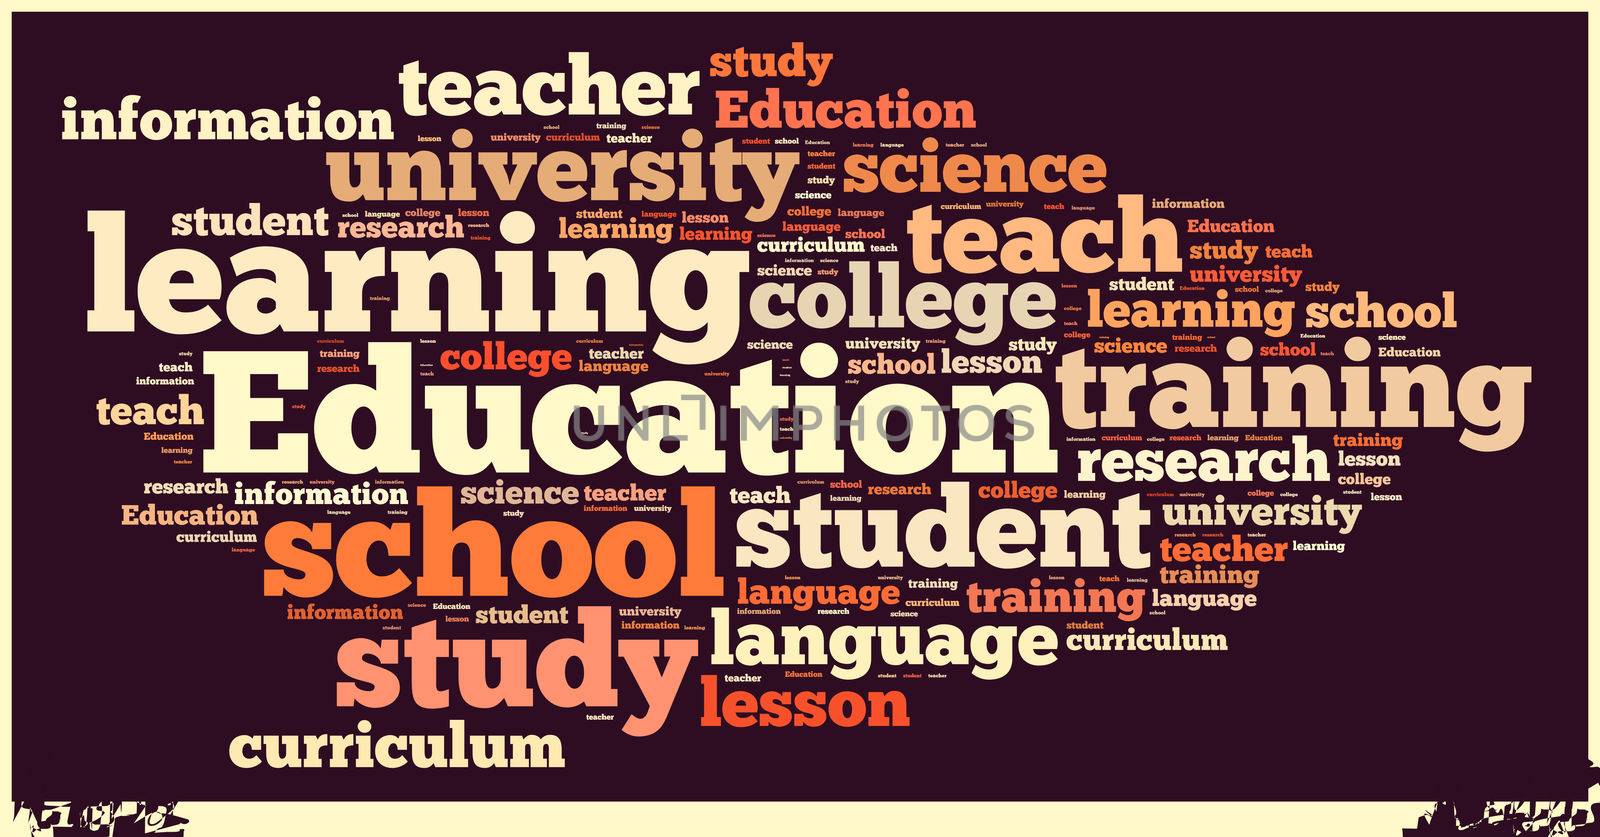 Illustration with word cloud on education at schools.